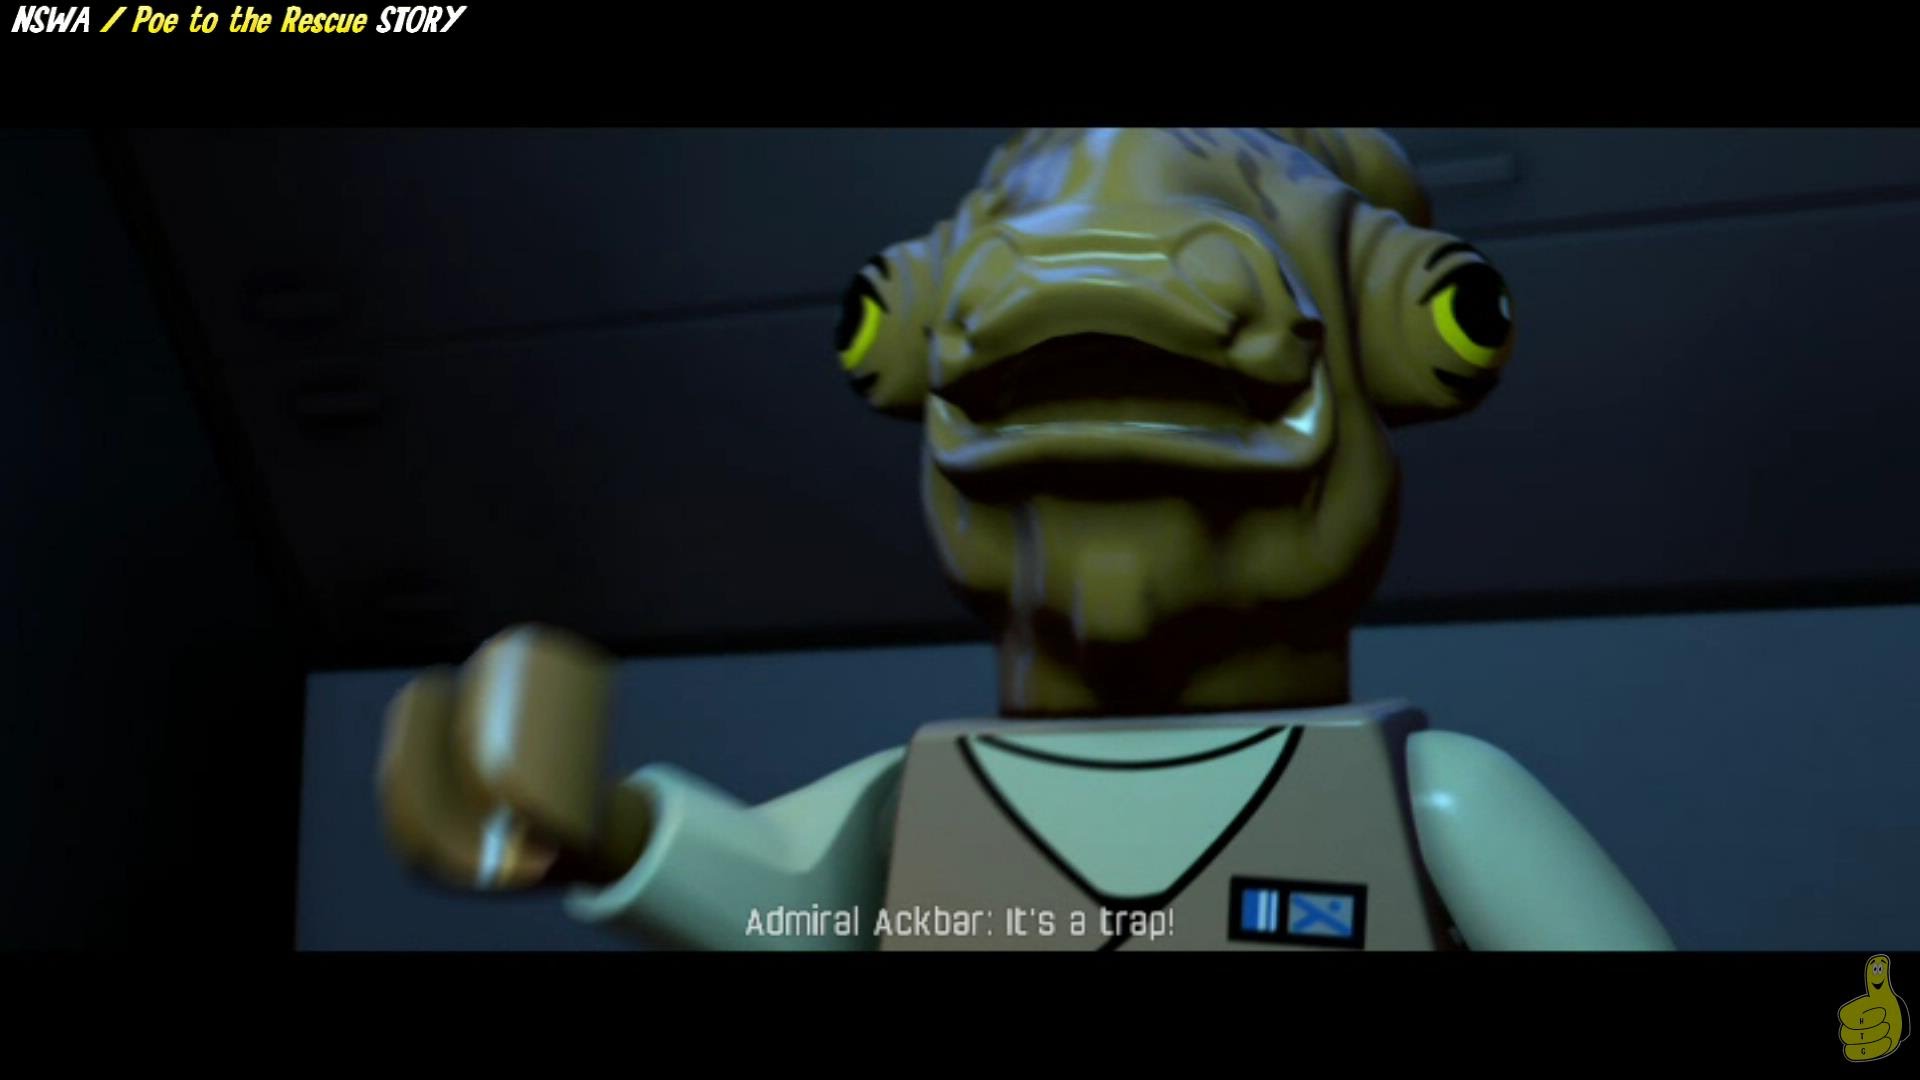 Lego Star Wars The Force Awakens: NSWA / Poe To The Rescue STORY – HTG